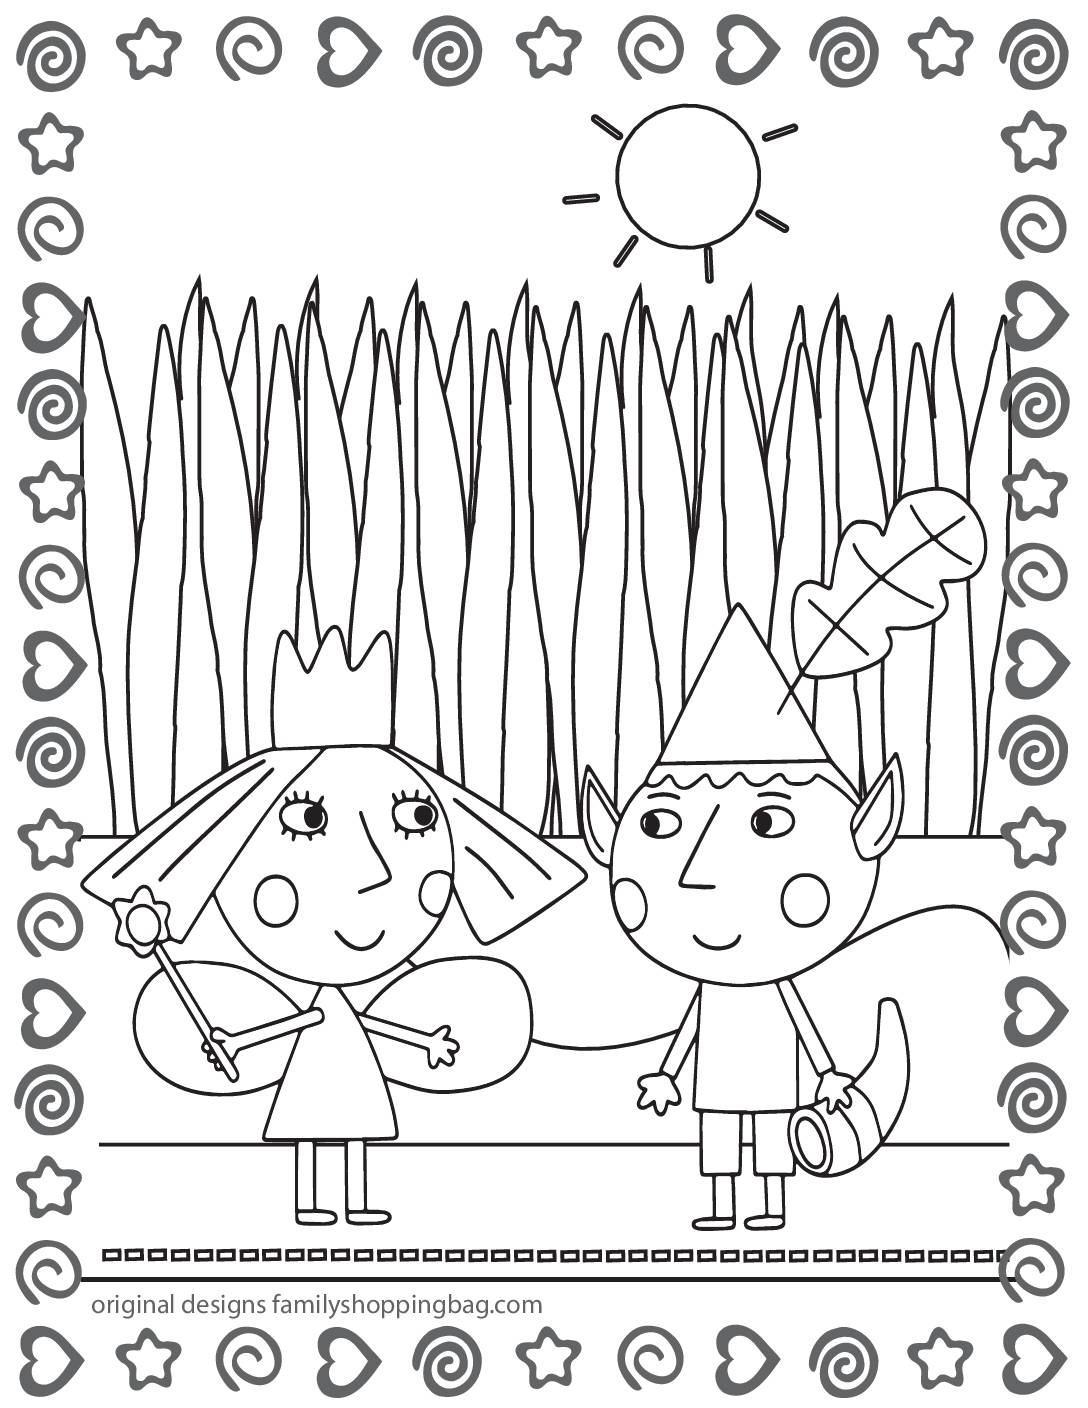 Coloring Page 7 Ben & Holly